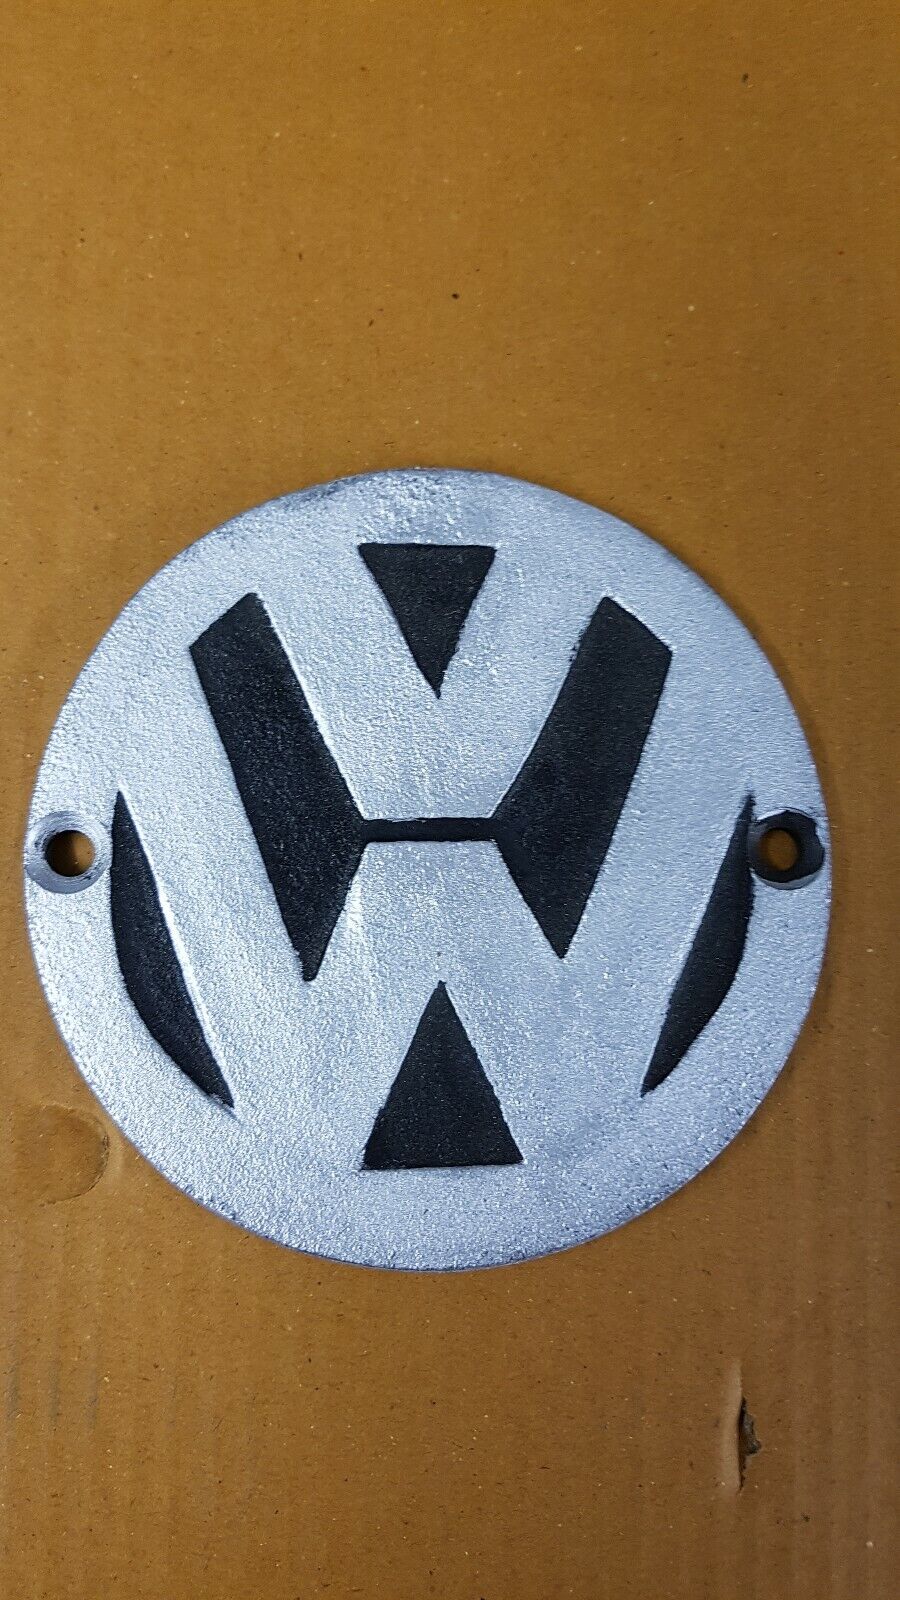   Volkswagon Cast iron display sign 12cm x 4mm thick , pre-holed . FREE POSTAGE.